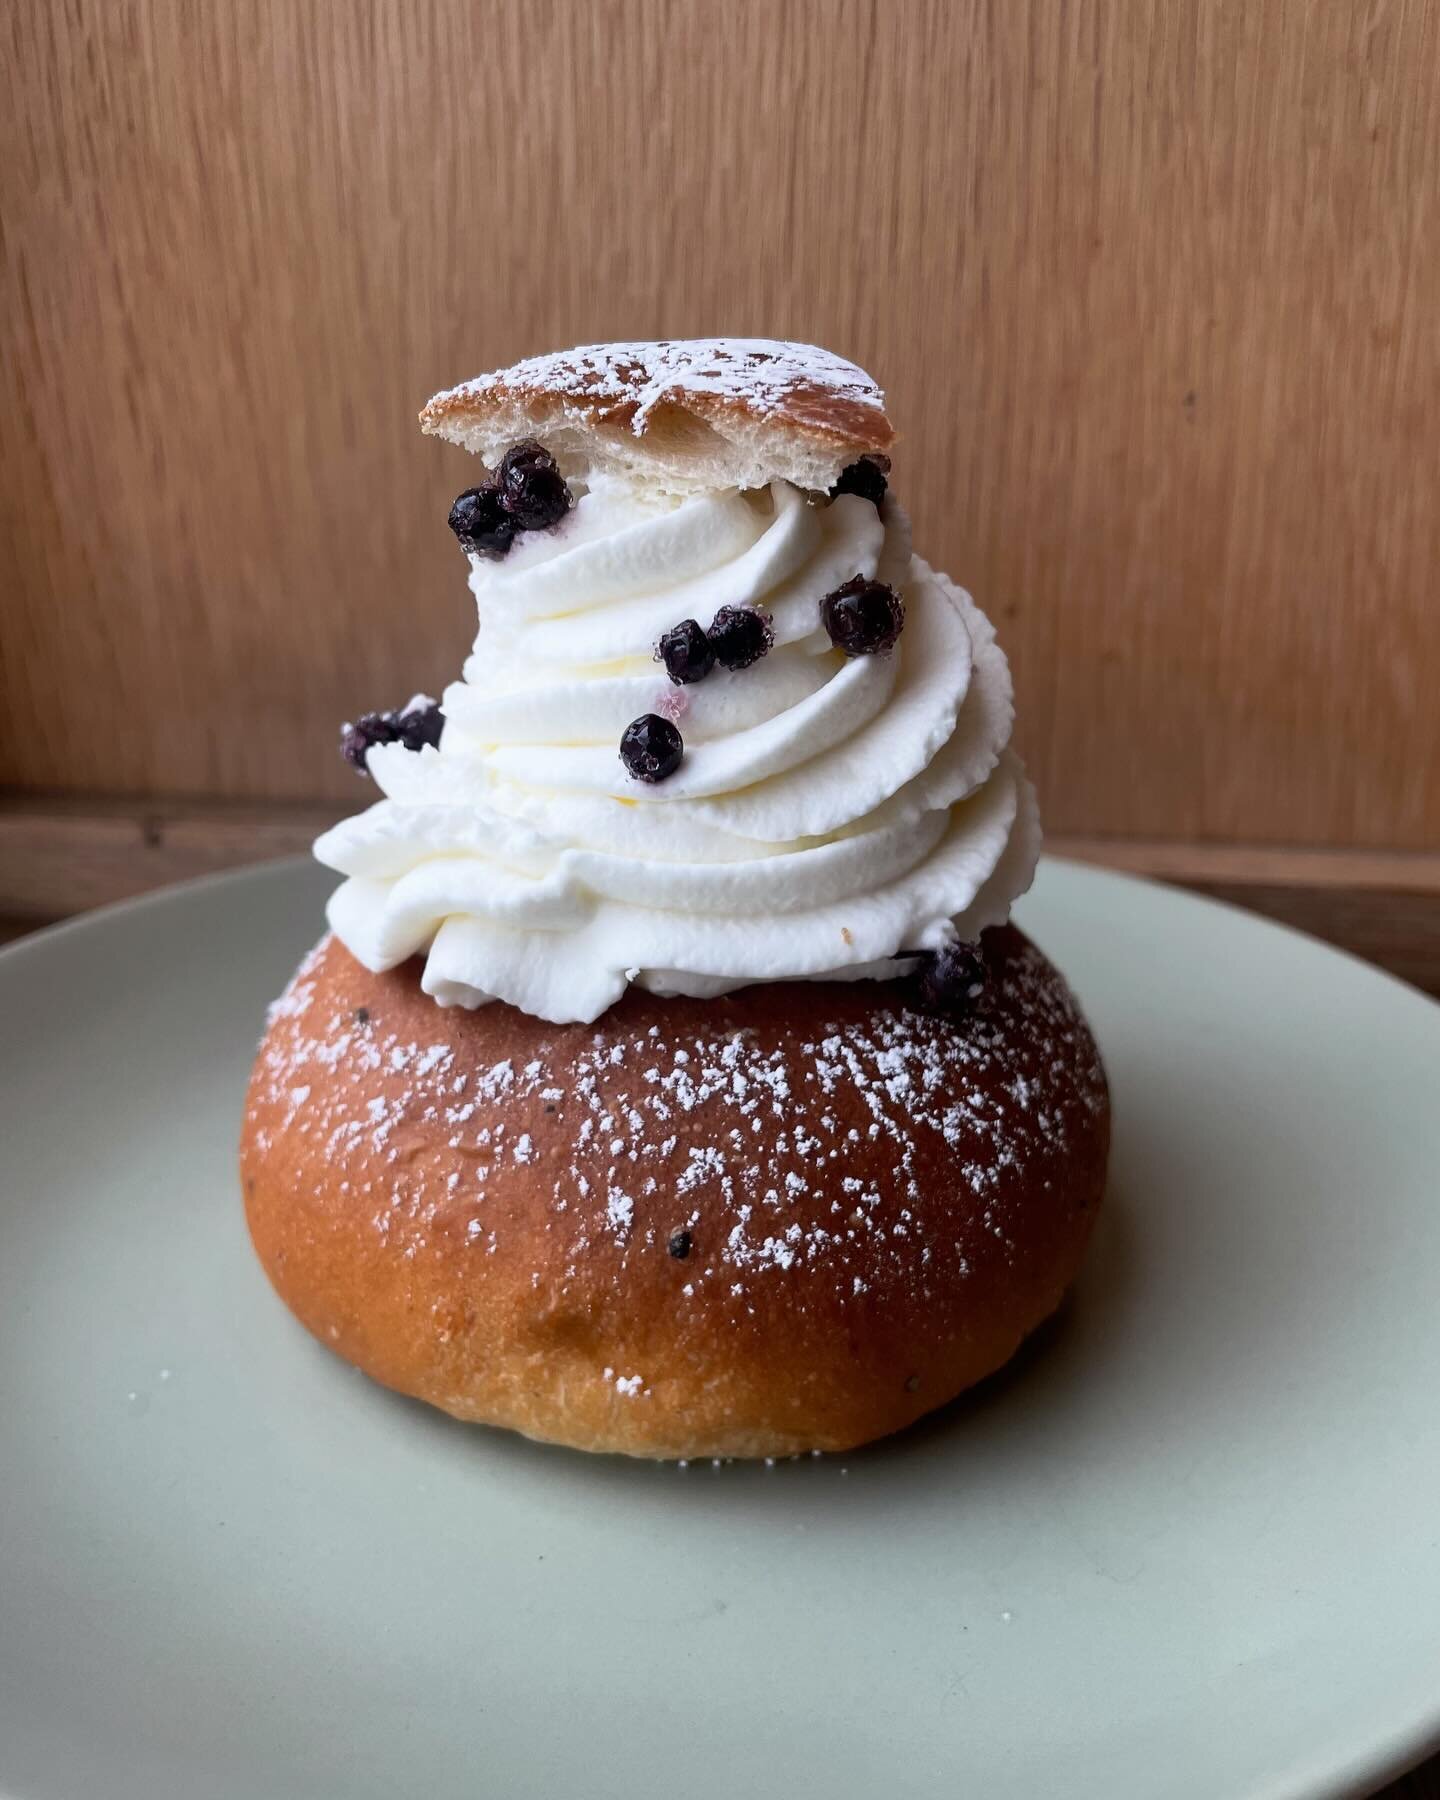 This weekend is the last weekend for semlor (until next year), so in addition to many of the traditional almond-filled buns, we&rsquo;ll also be making this special version filled with huckleberry and strawberry jam. Happy Saturday! 💗

#semla #semlo